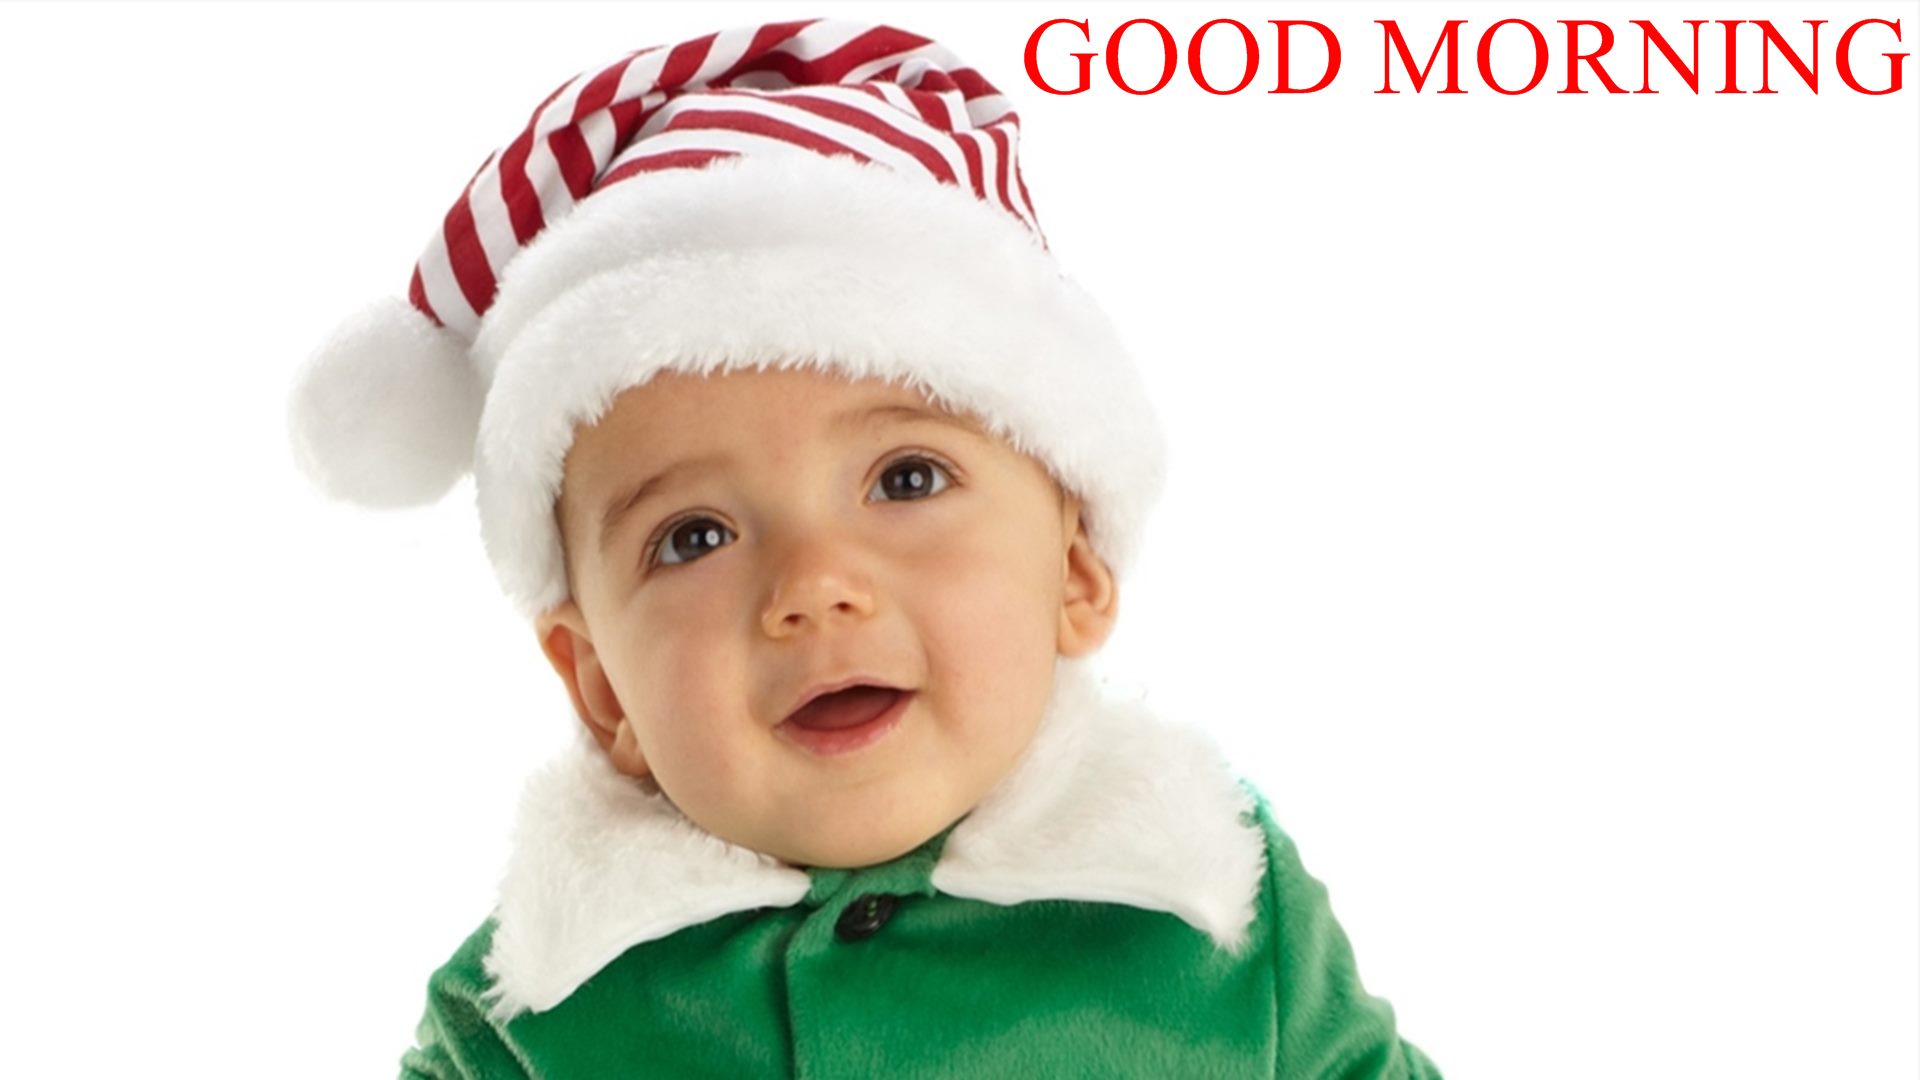 Little Baby Boy Christmas Outfit - HD Wallpaper 